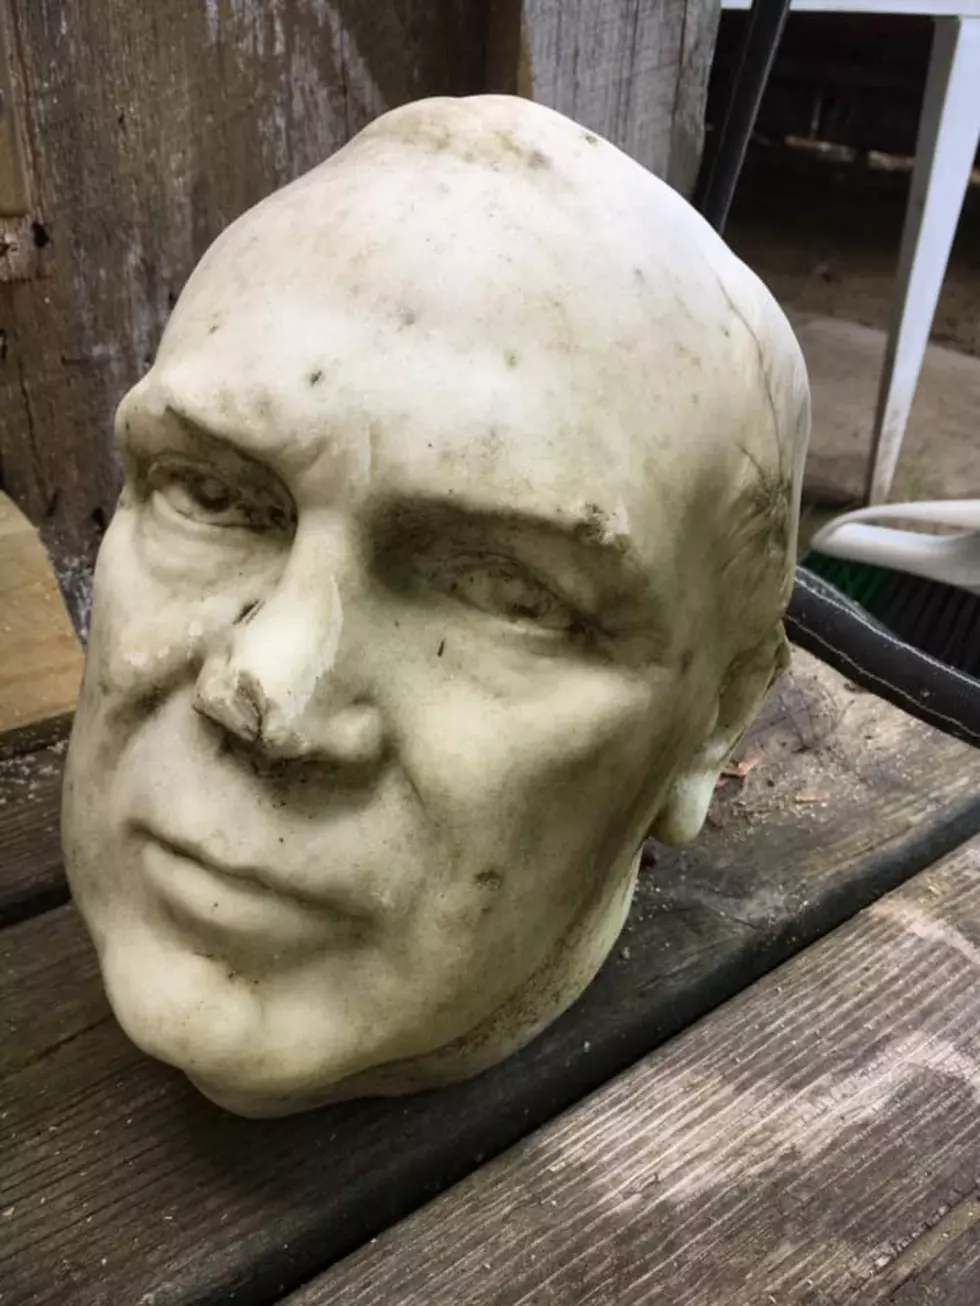 A Head Was Discovered In Brownfield! Well, A Marble Head.